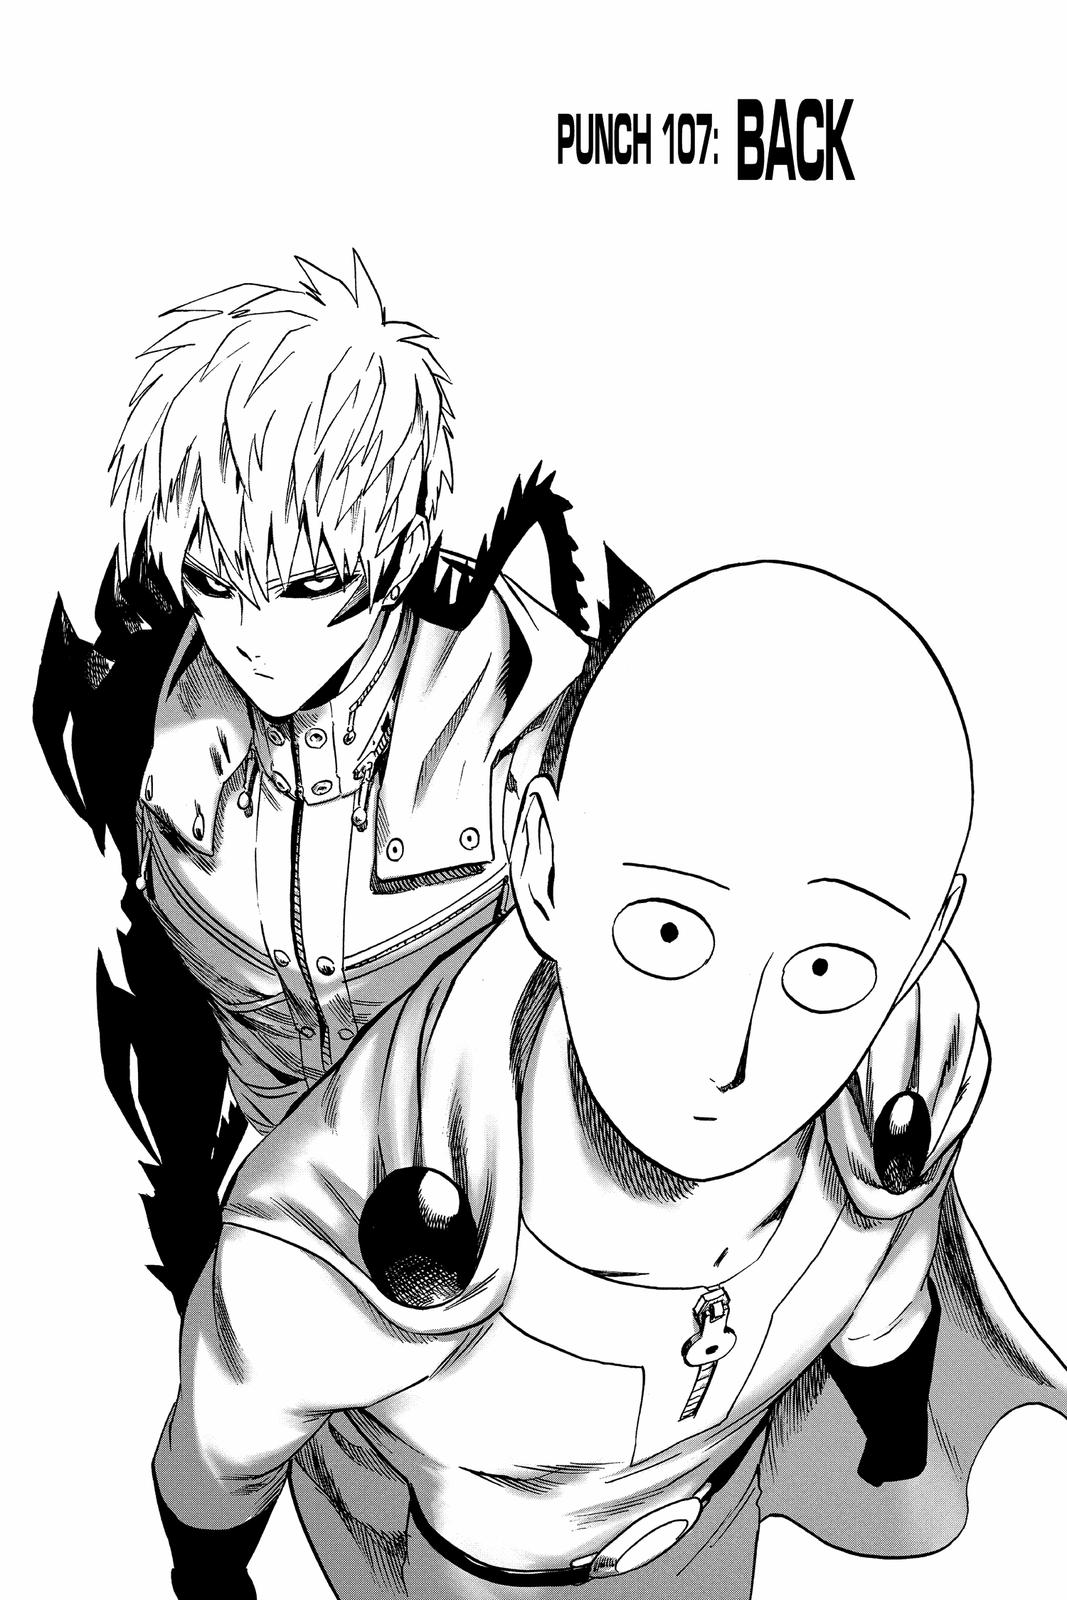 Chapter 107, One-Punch Man Wiki